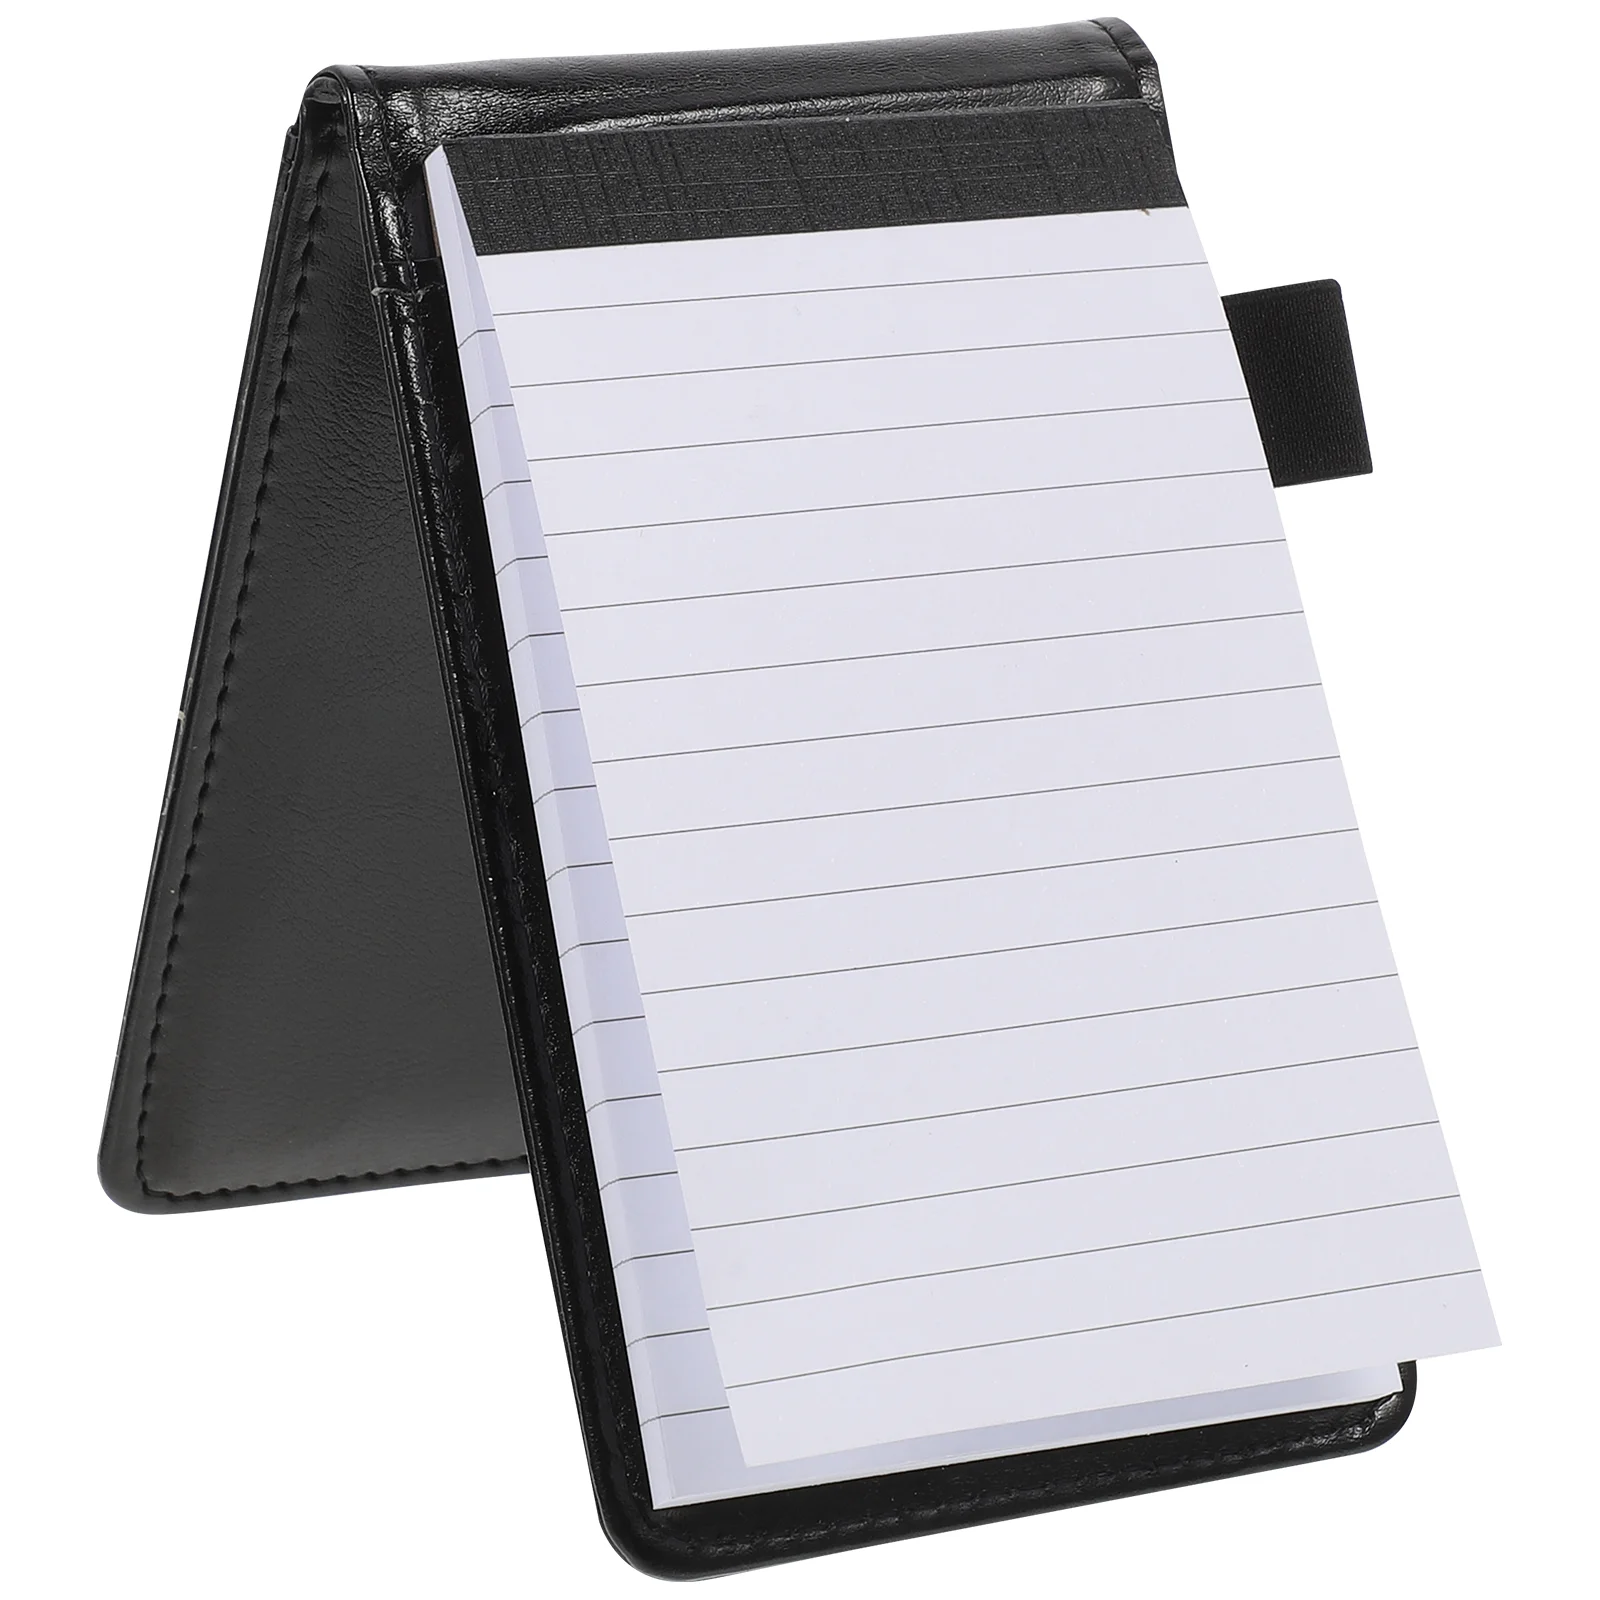 

Business Convenient Portable Flipped Business Book Office Supplies Portable Memo Pad Office Pocket Notepad for Work Memo Office